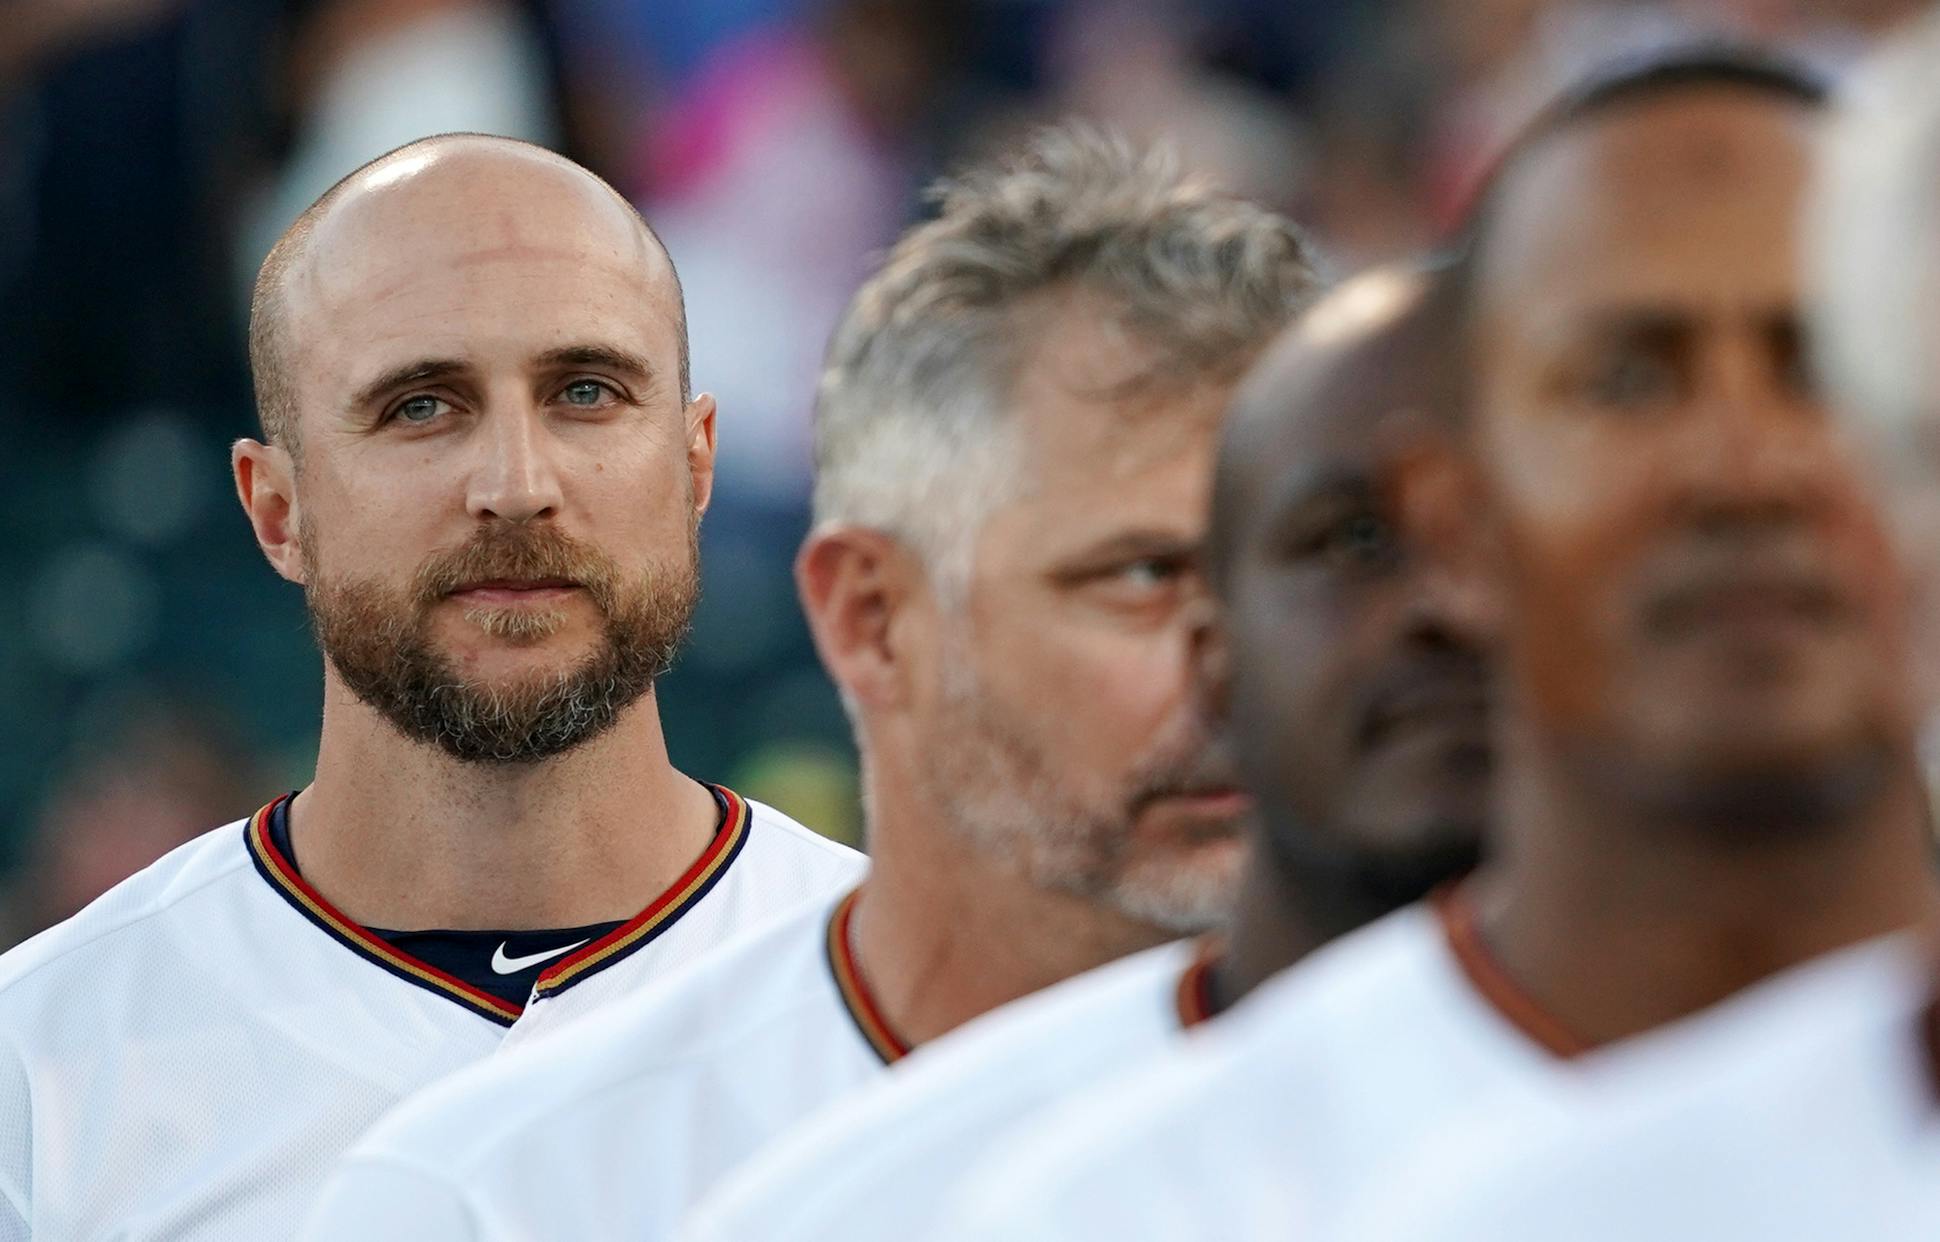 Minnesota Twins manager Rocco Baldelli (5) stood with his fellow coaches during the National Anthem before Saturday’s game.